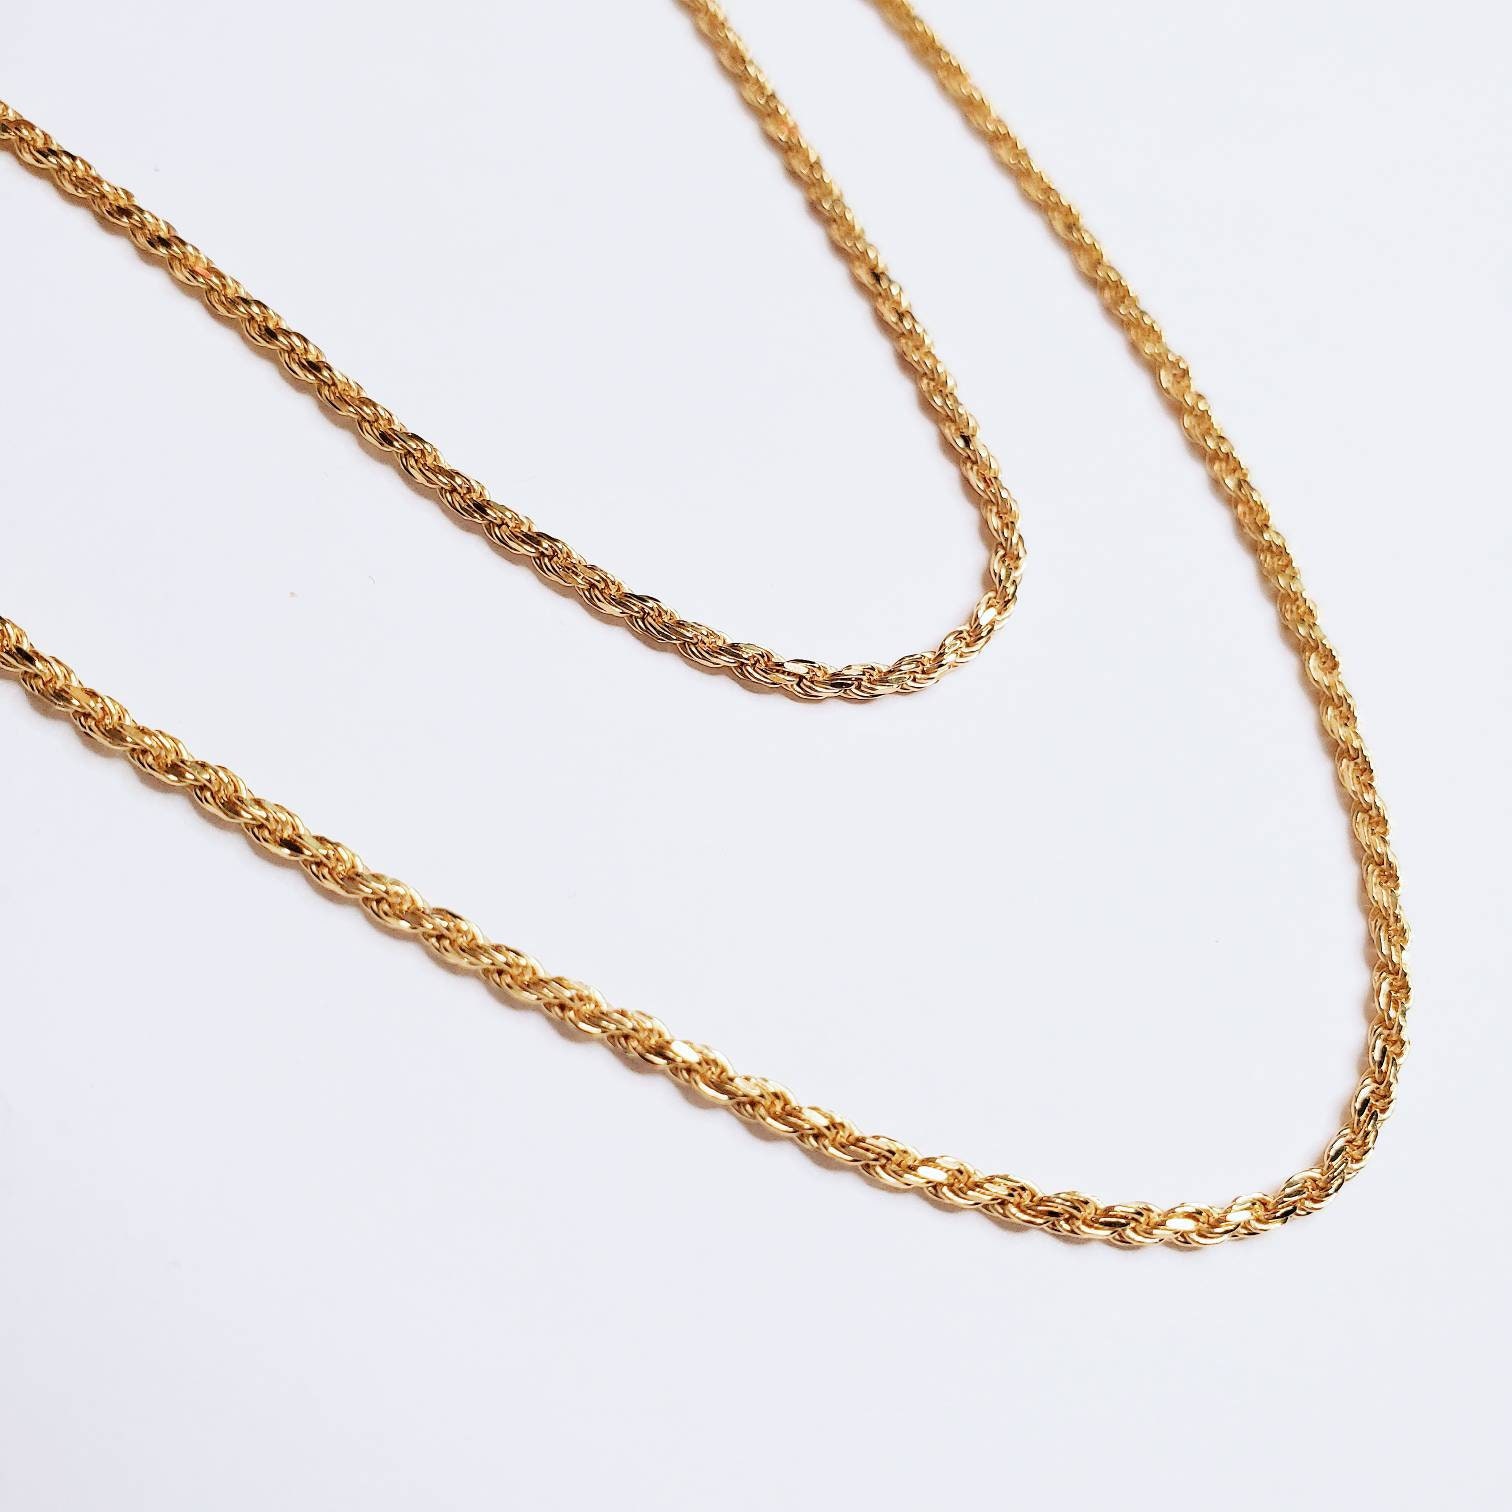 Gold Plated Necklace Chain, Vermeil Sterling Silver Necklace Chain-Bracelet,  Anklet - Vermeil Chain Bulk - Tiny Curb Chain-Long Necklace - 22-36 inches.